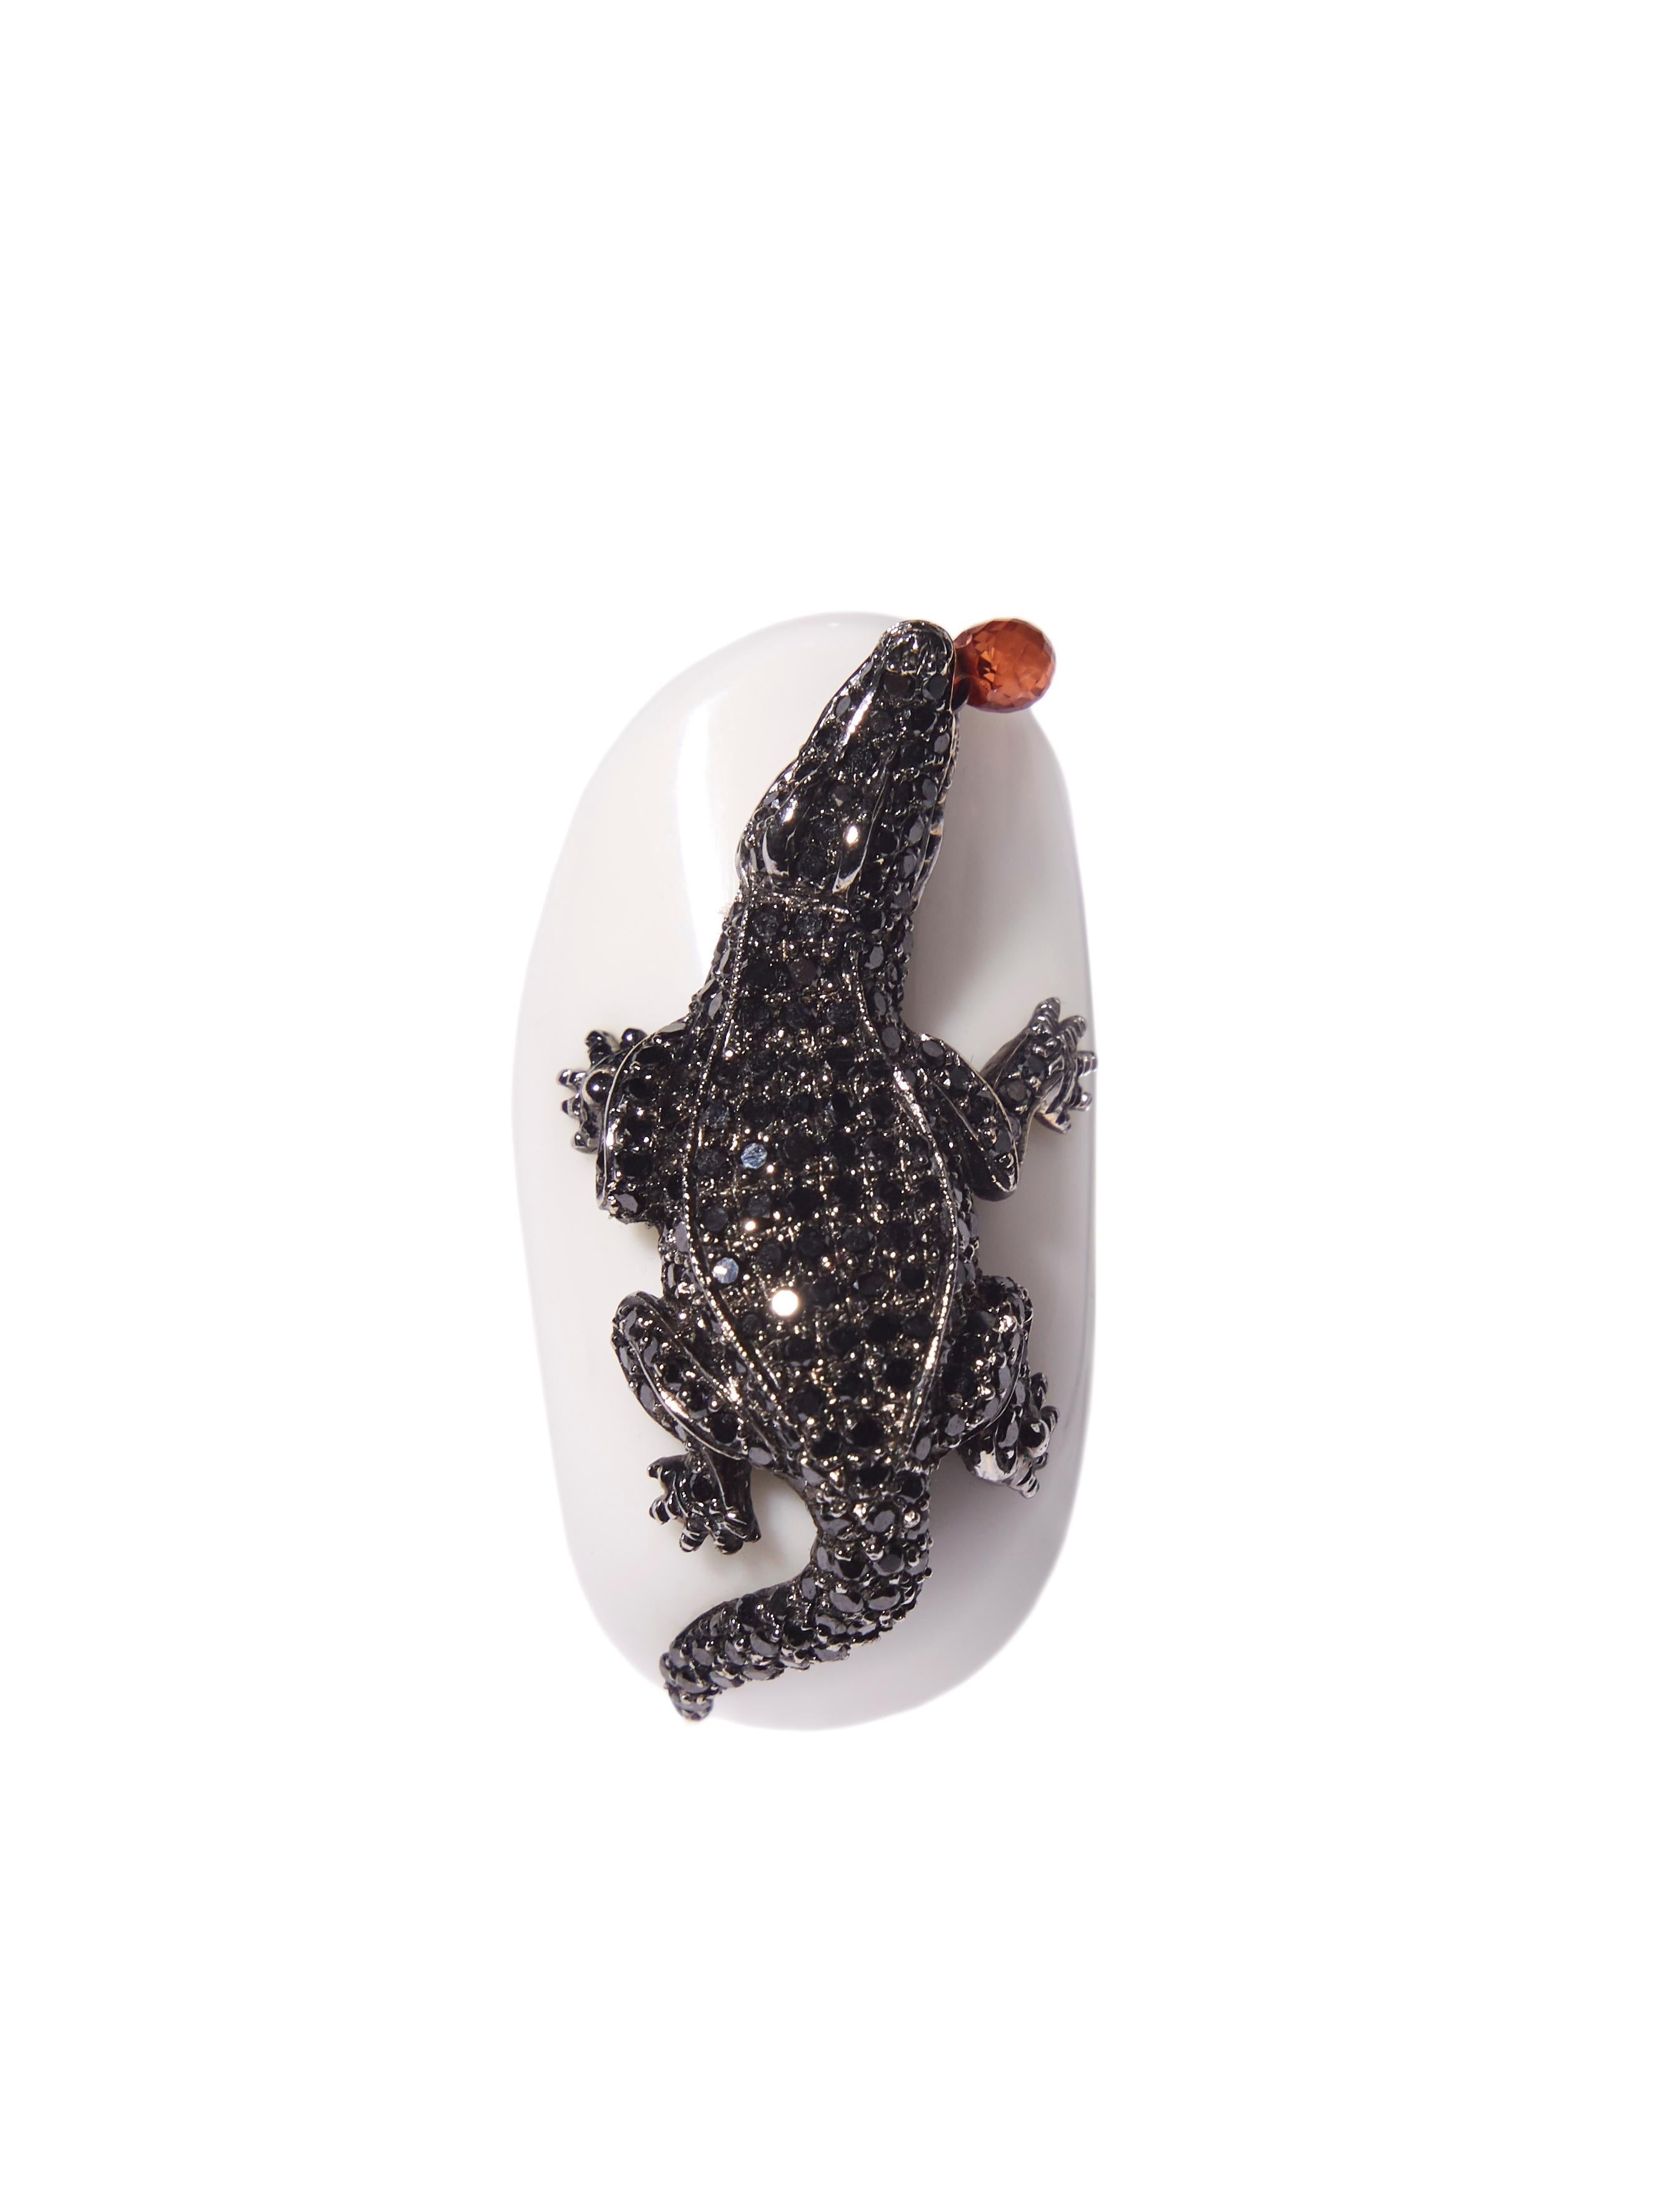 Ring sculpted in white agate decorated with an alligator paved in black diamonds. Its garnet tongue moves whilst lying in wait.. ready to attack..

Admire the beauty and craftsmanship of this piece, a ring that is truly unique; you will not find